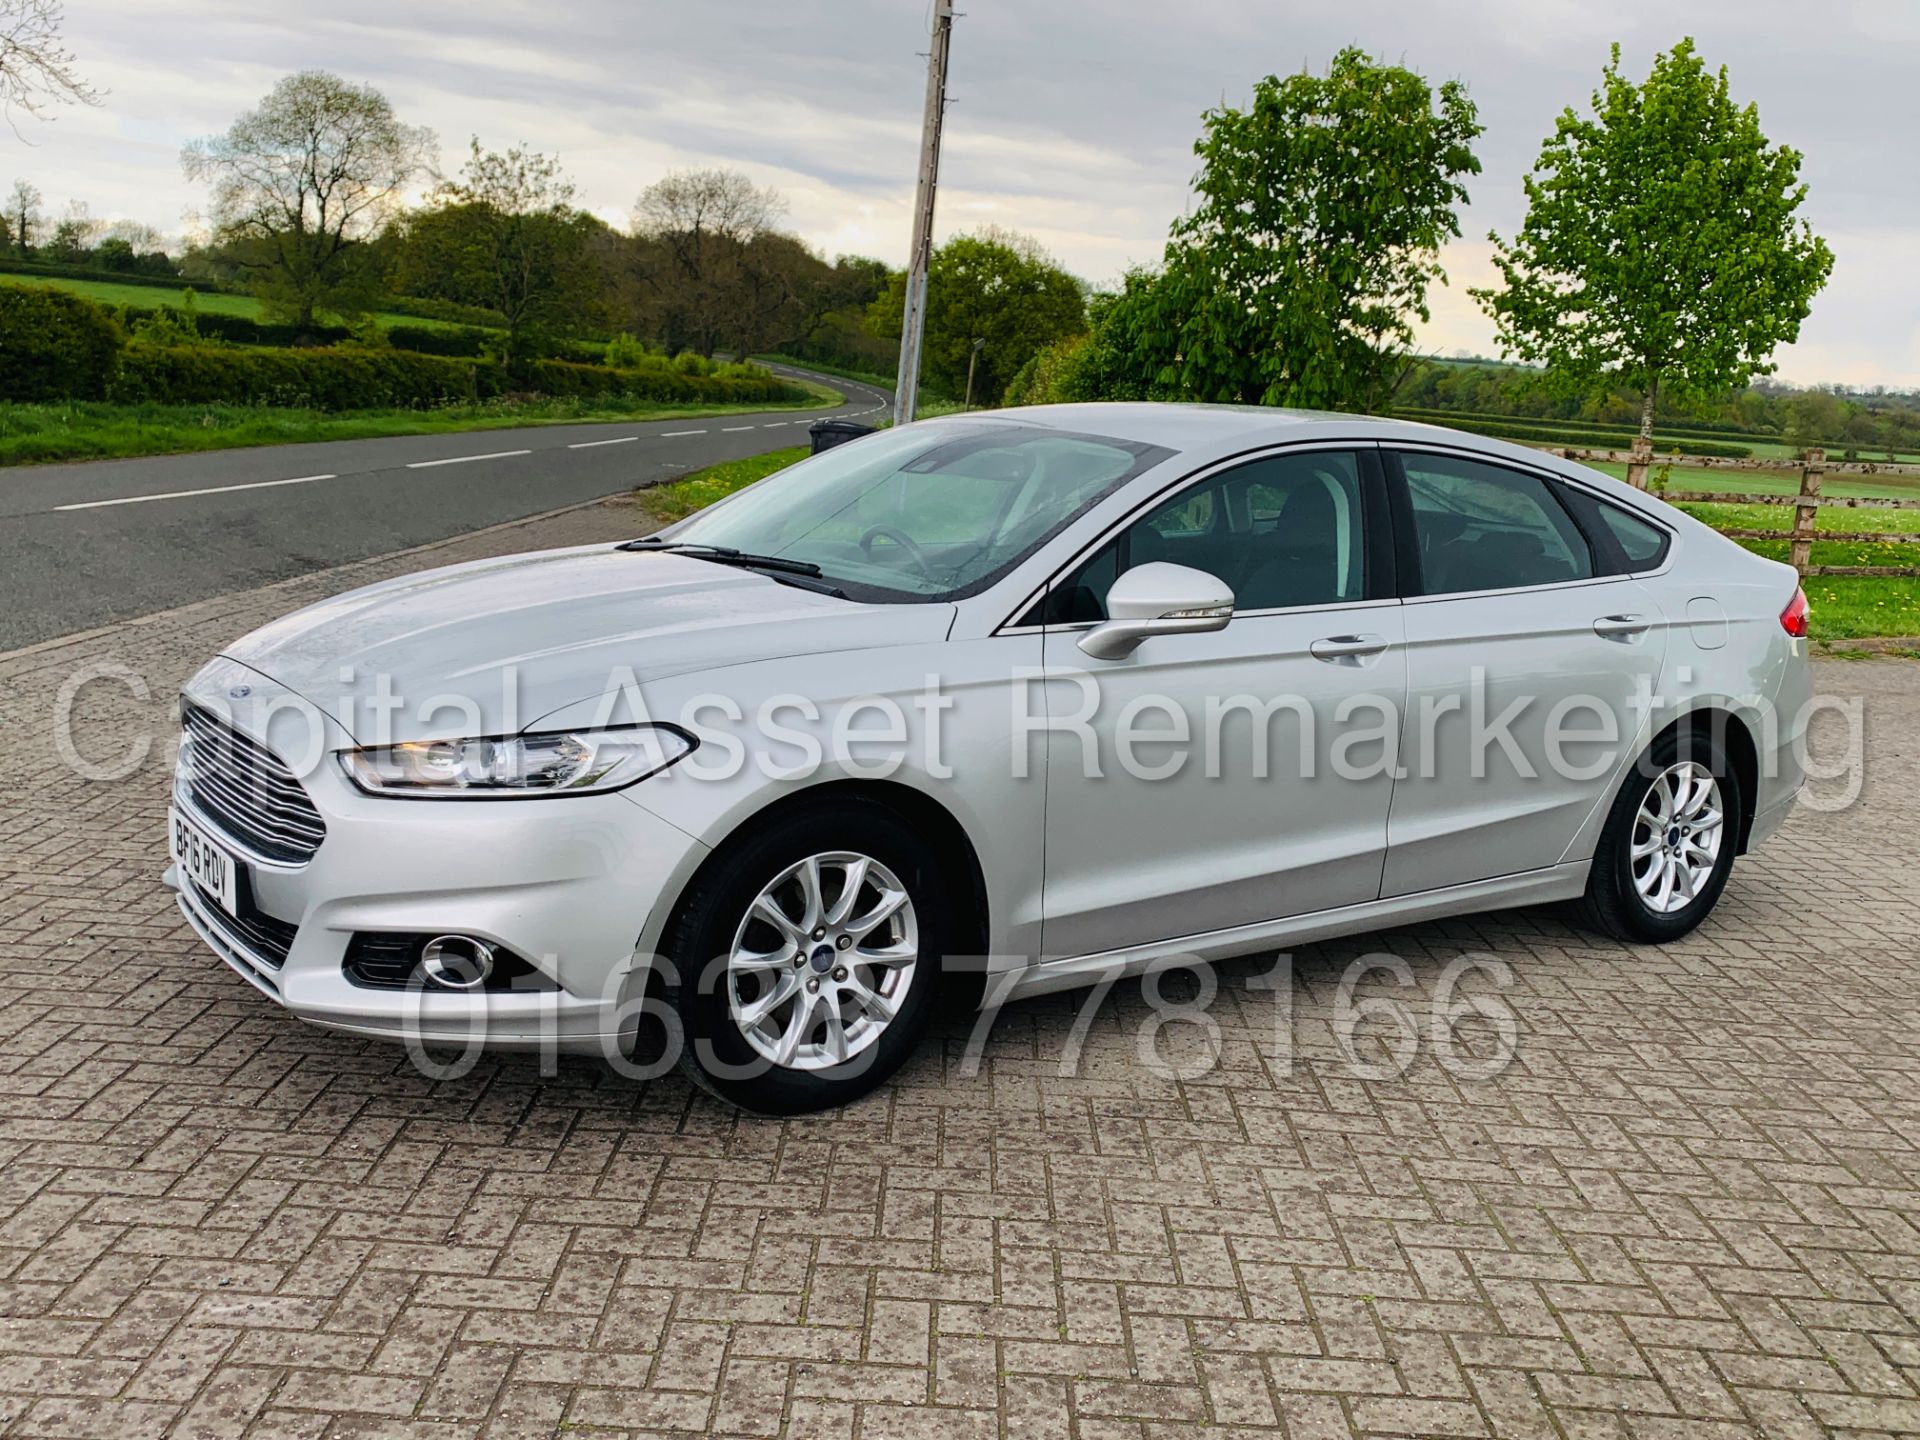 FORD MONDEO *TITANIUM* HATCHBACK (2016) '1.5 TDCI - EURO 6 - 6 SPEED' *1 OWNER - FULL HISTORY*